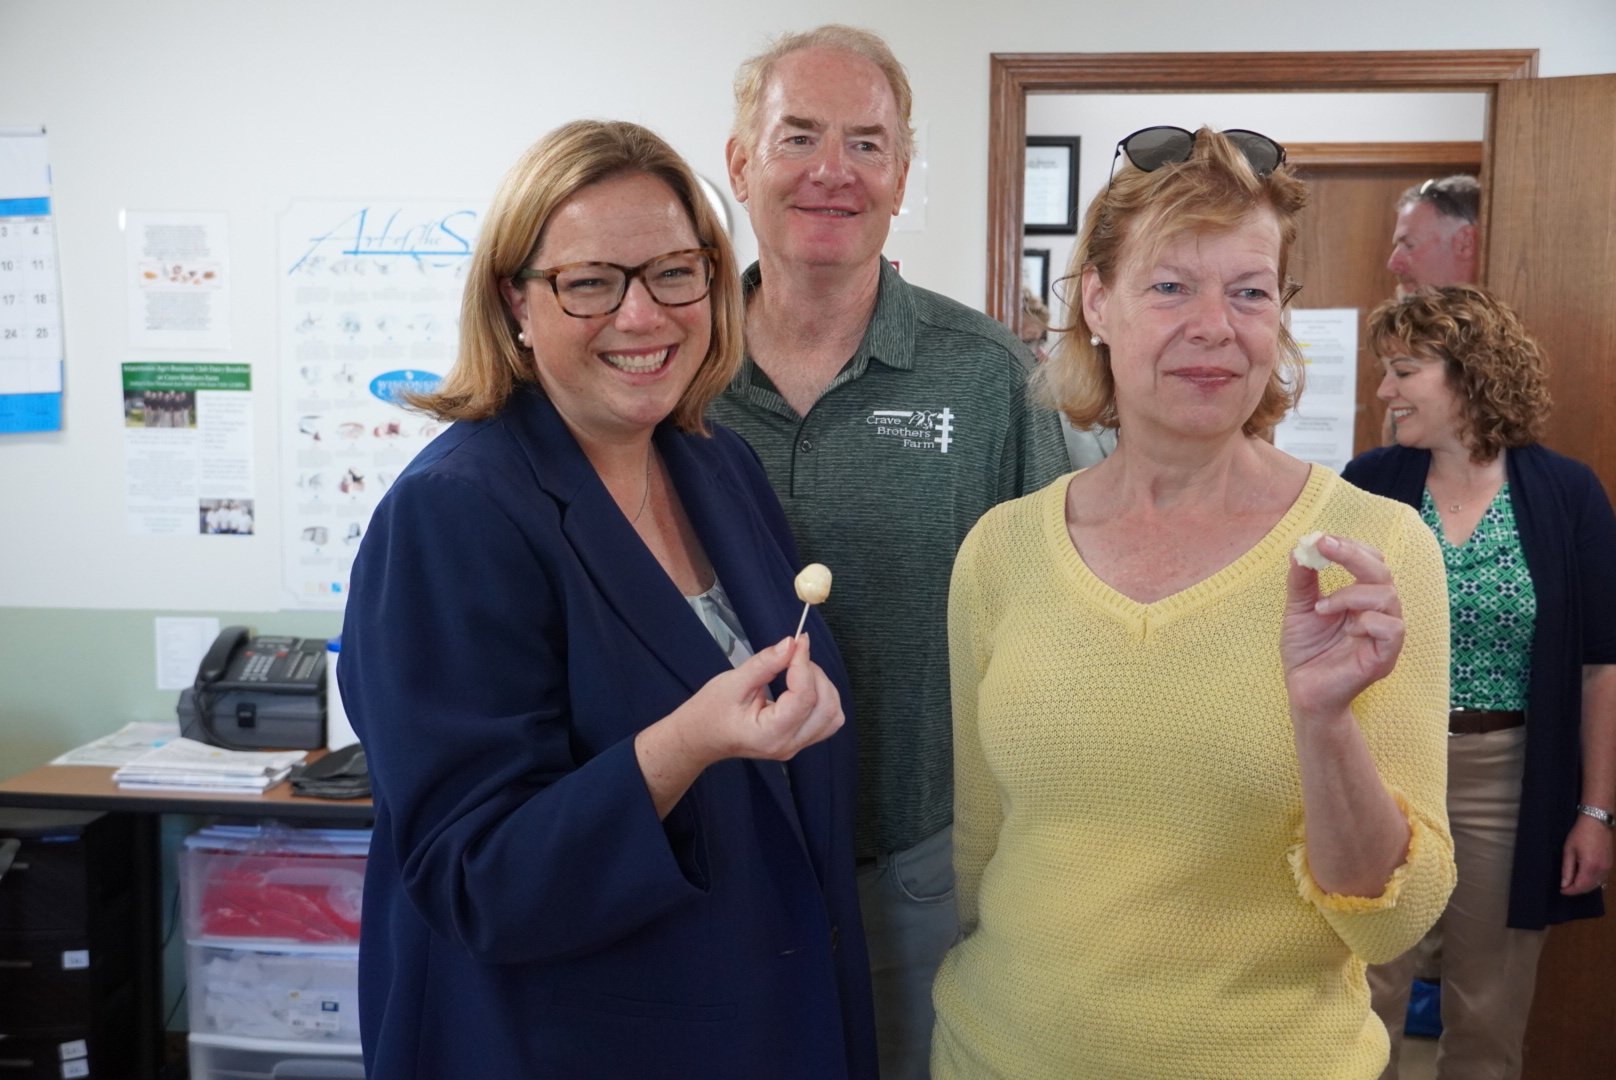 USDA Under Secretary Jenny Lester Moffitt and U.S. Senator Tammy Baldwin sampling the cheese at Crave Brothers Farmstead Cheese, with owner George Crave in Waterloo, Wisconsin